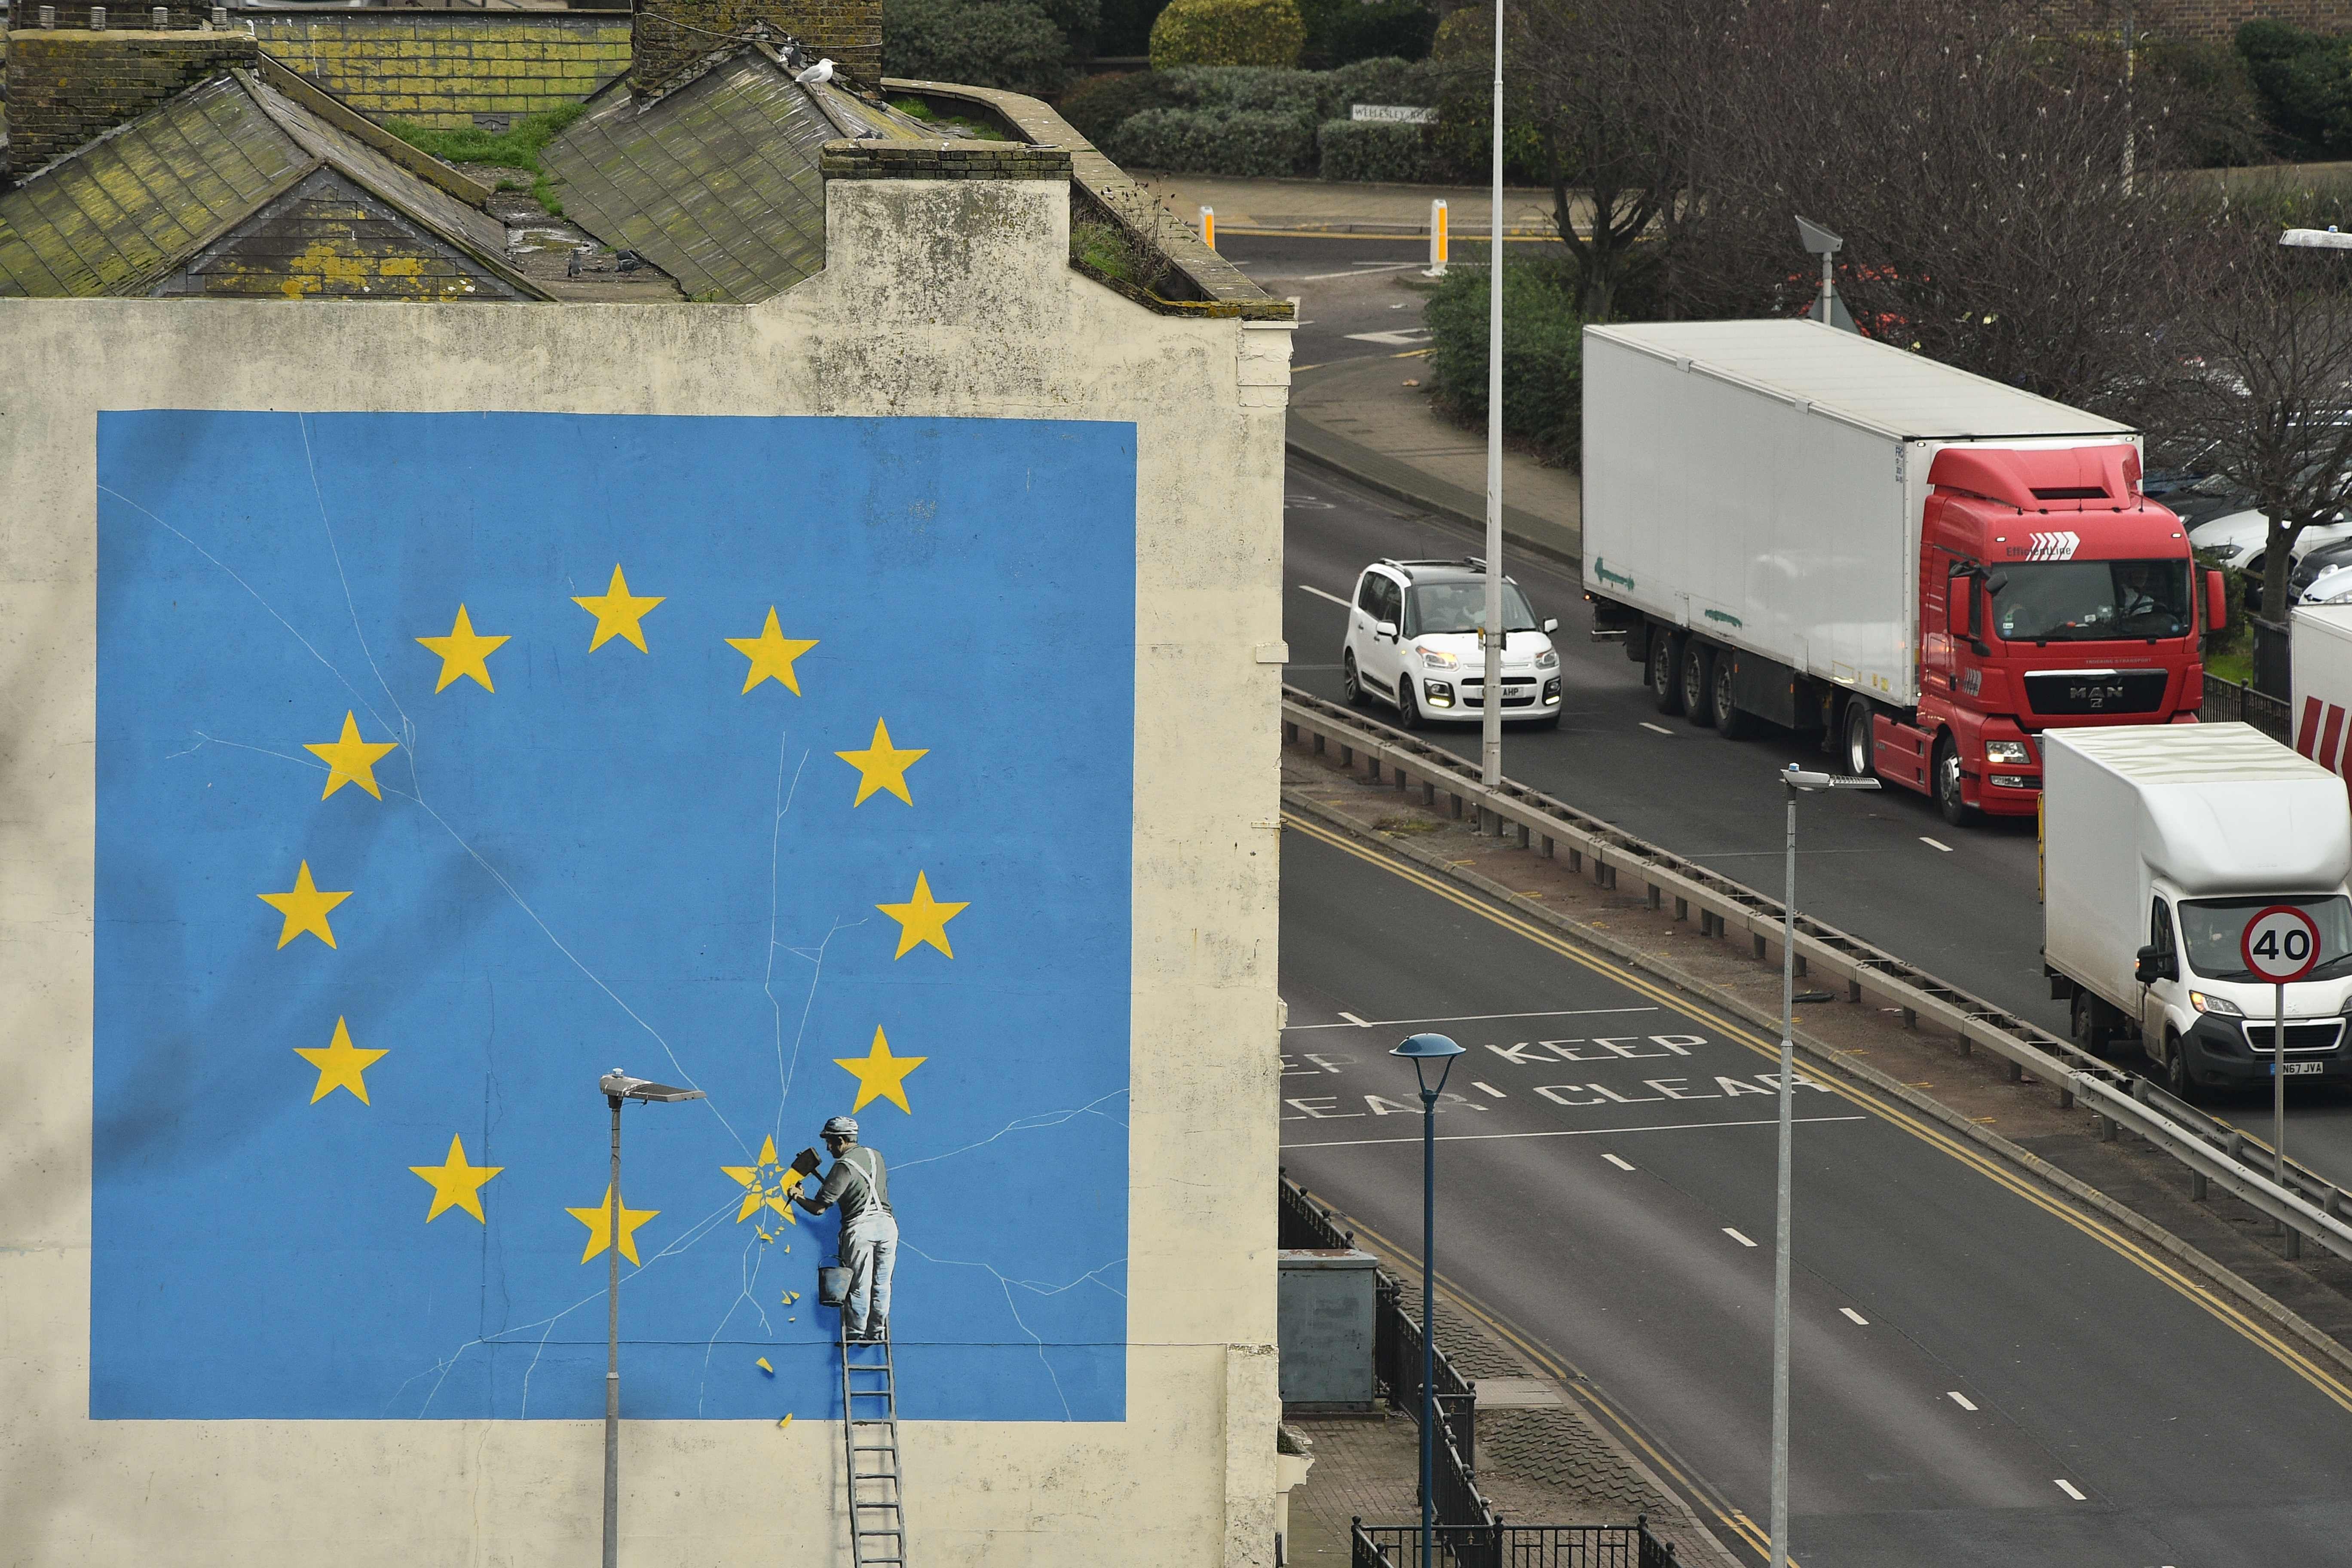 The EU themed piece was painted on the side a building in Dover in 2017